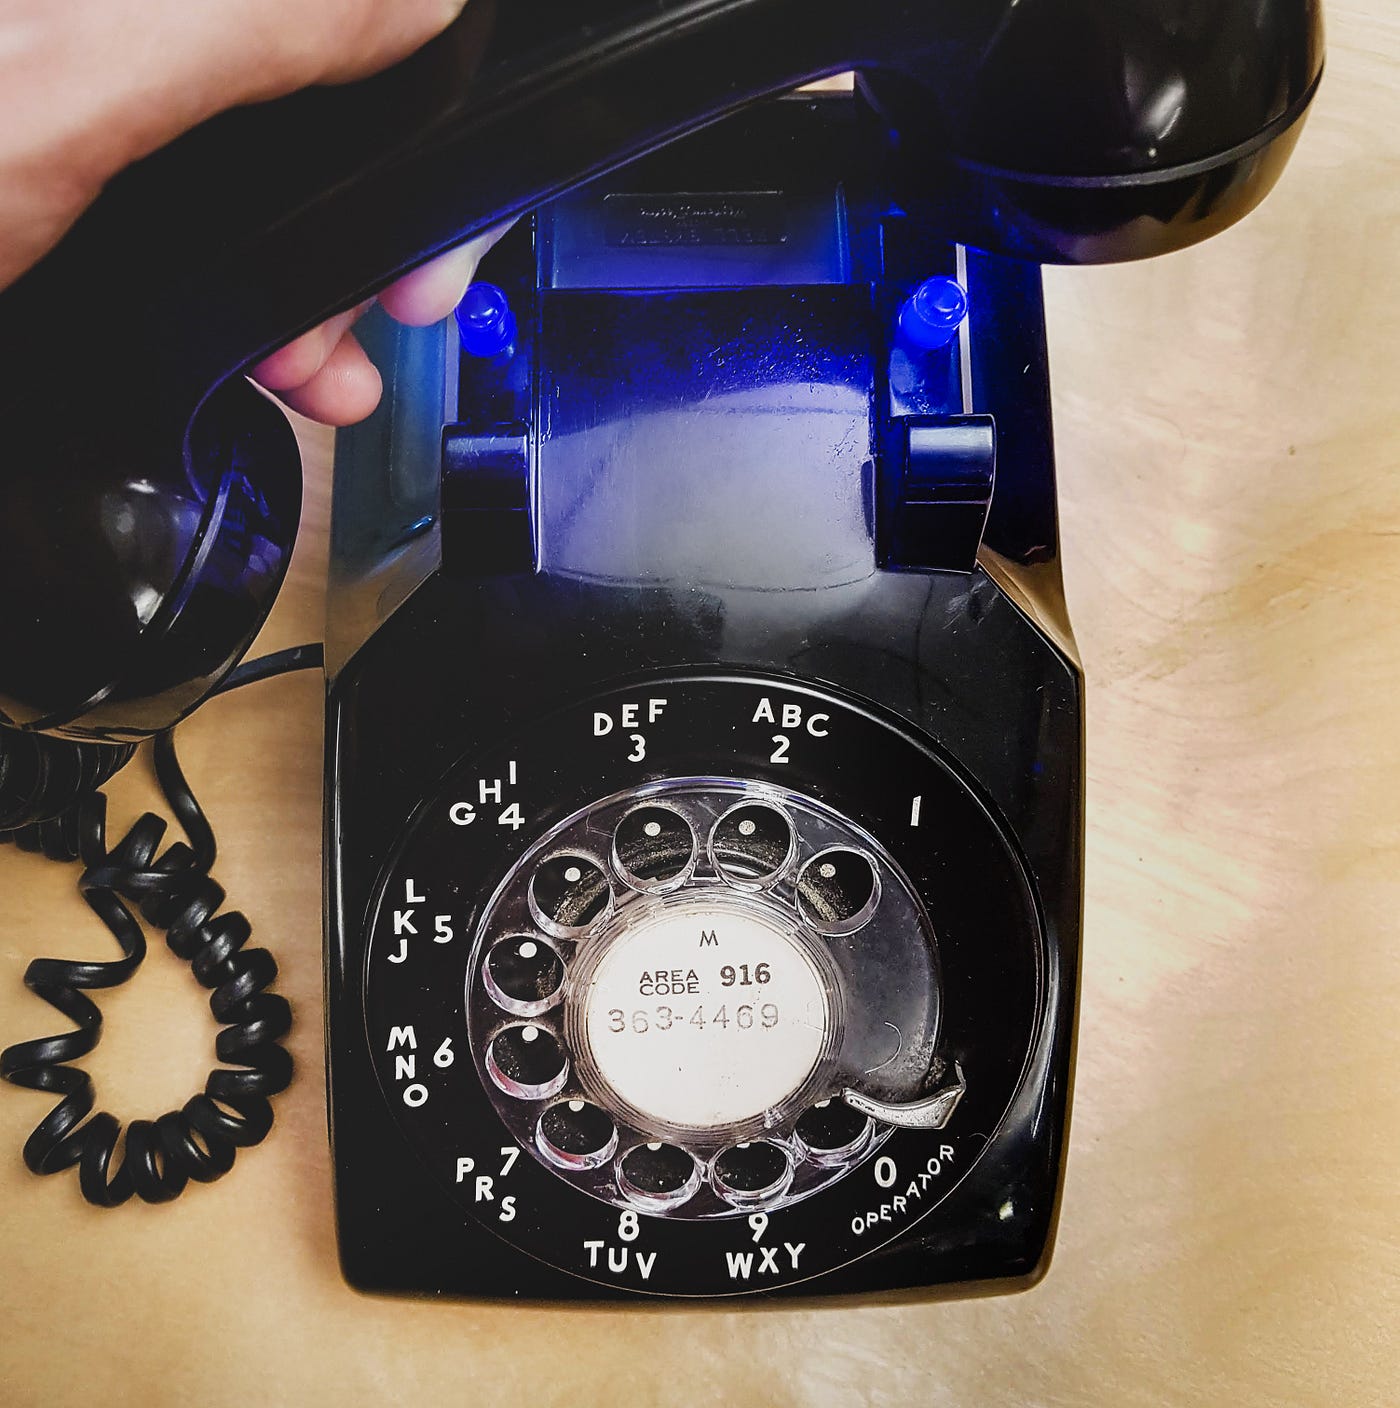 Building Alexa into a Rotary Phone | by Mike Dodge | Medium